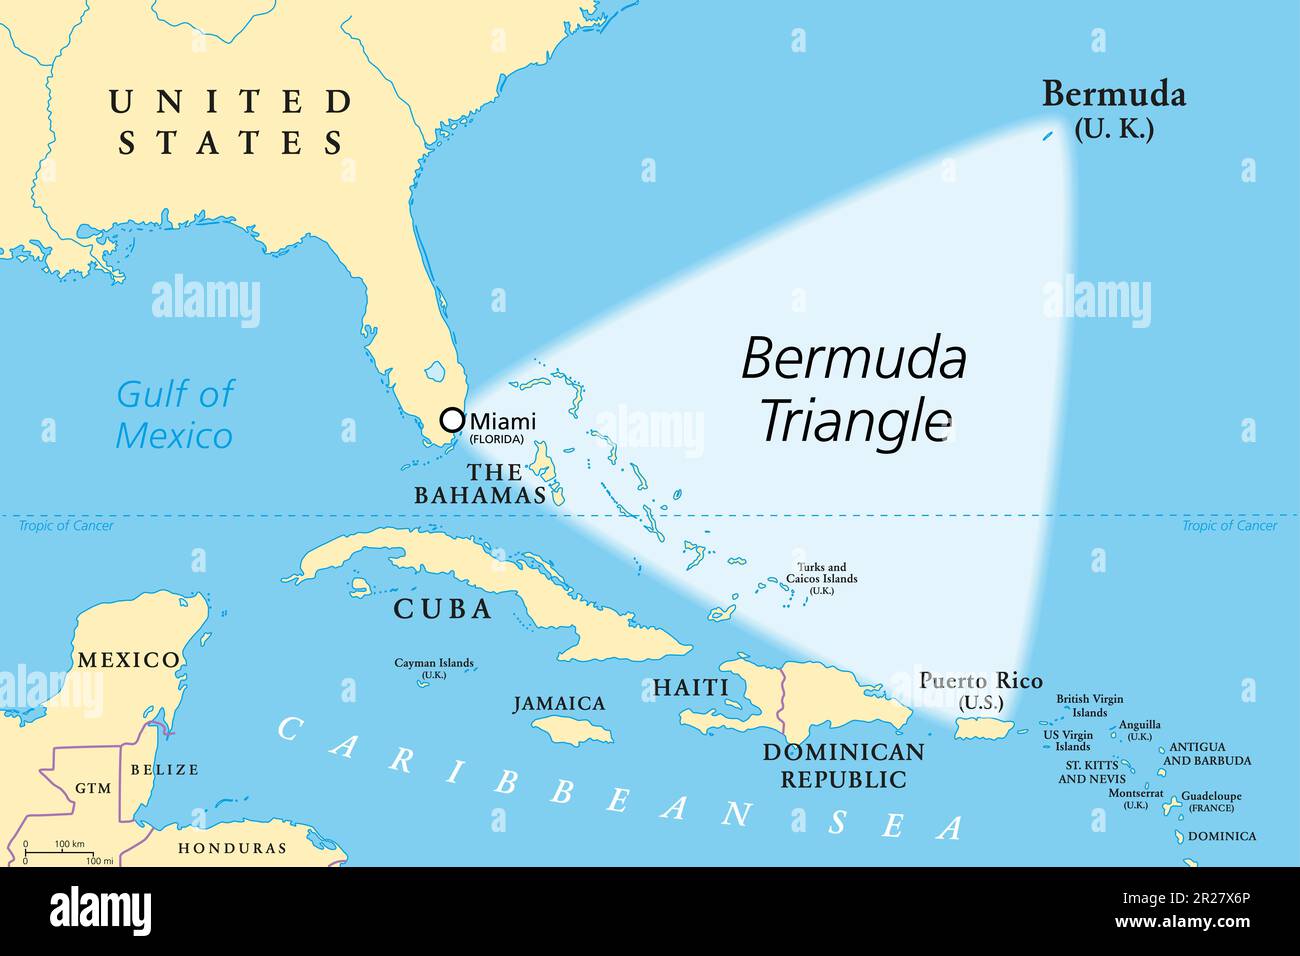 Bermuda Triangle, Devils Triangle, map. Region in North Atlantic between Bermuda, Miami and Puerto Rico, where aircrafts and ships disappeared. Stock Photo